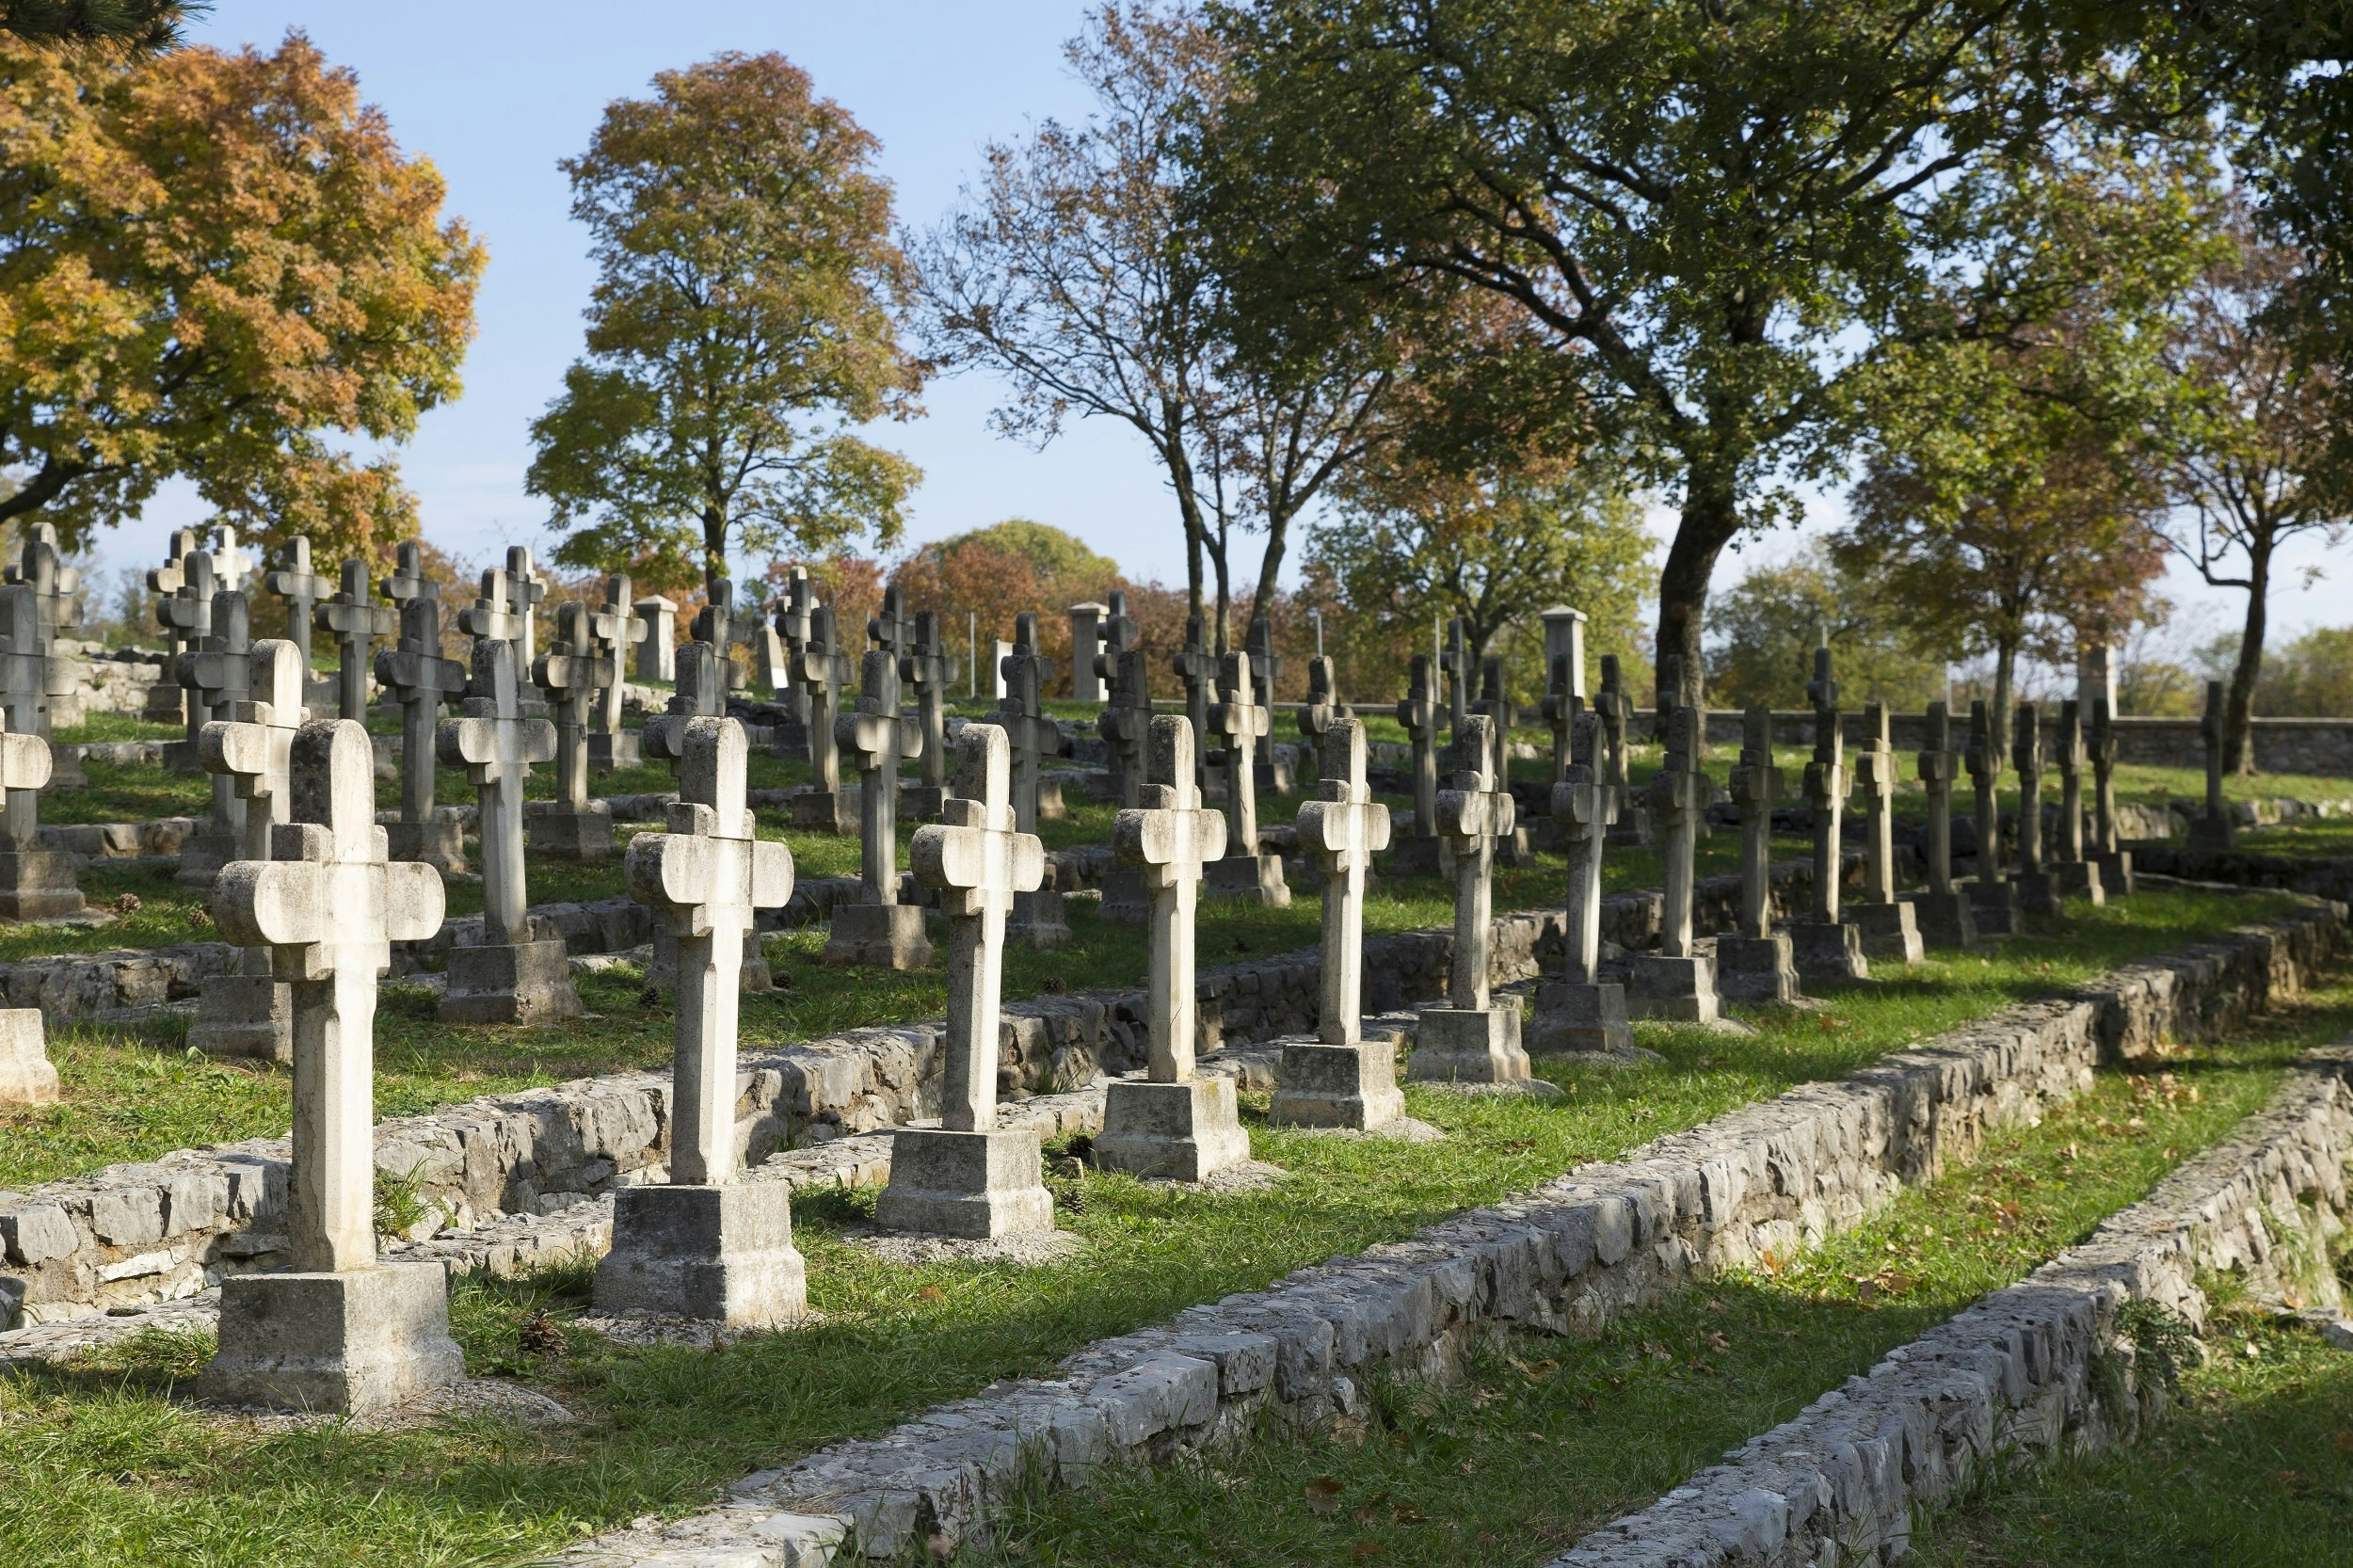 Rows of stone crosses mark graves in a cemetery